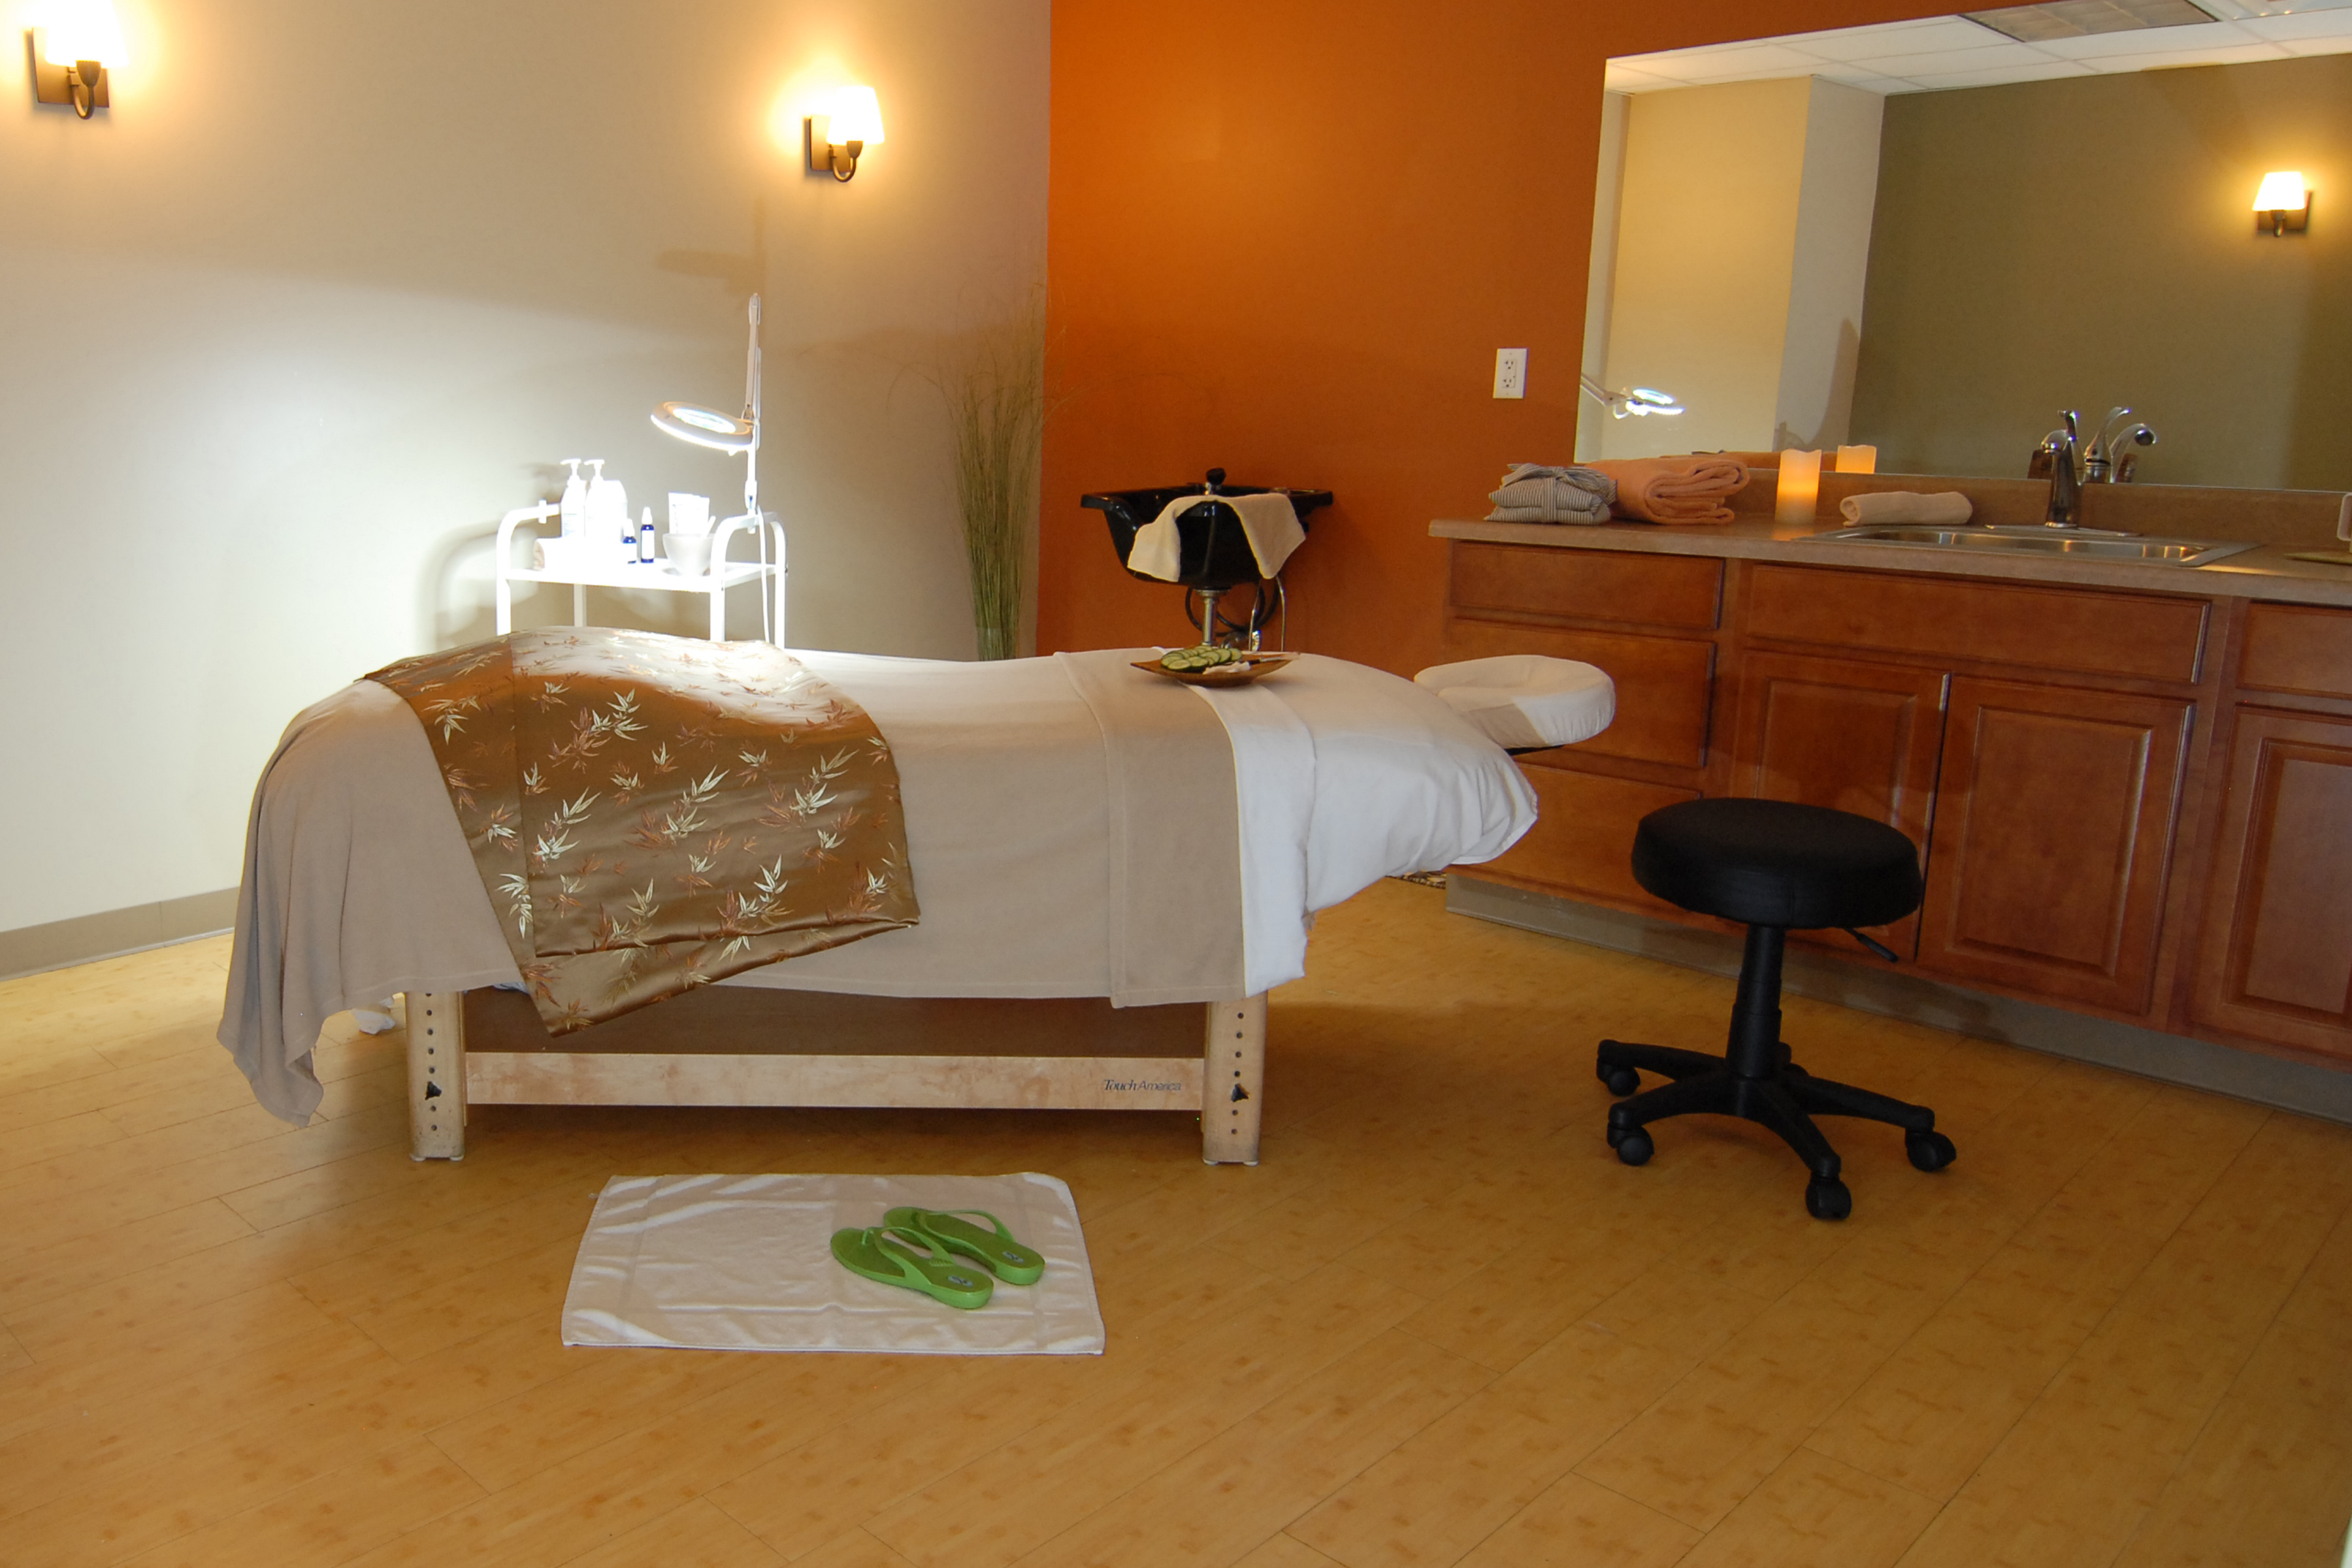 Balance Spa In Tewksbury Offers Aromatic Holiday Specials Northshore